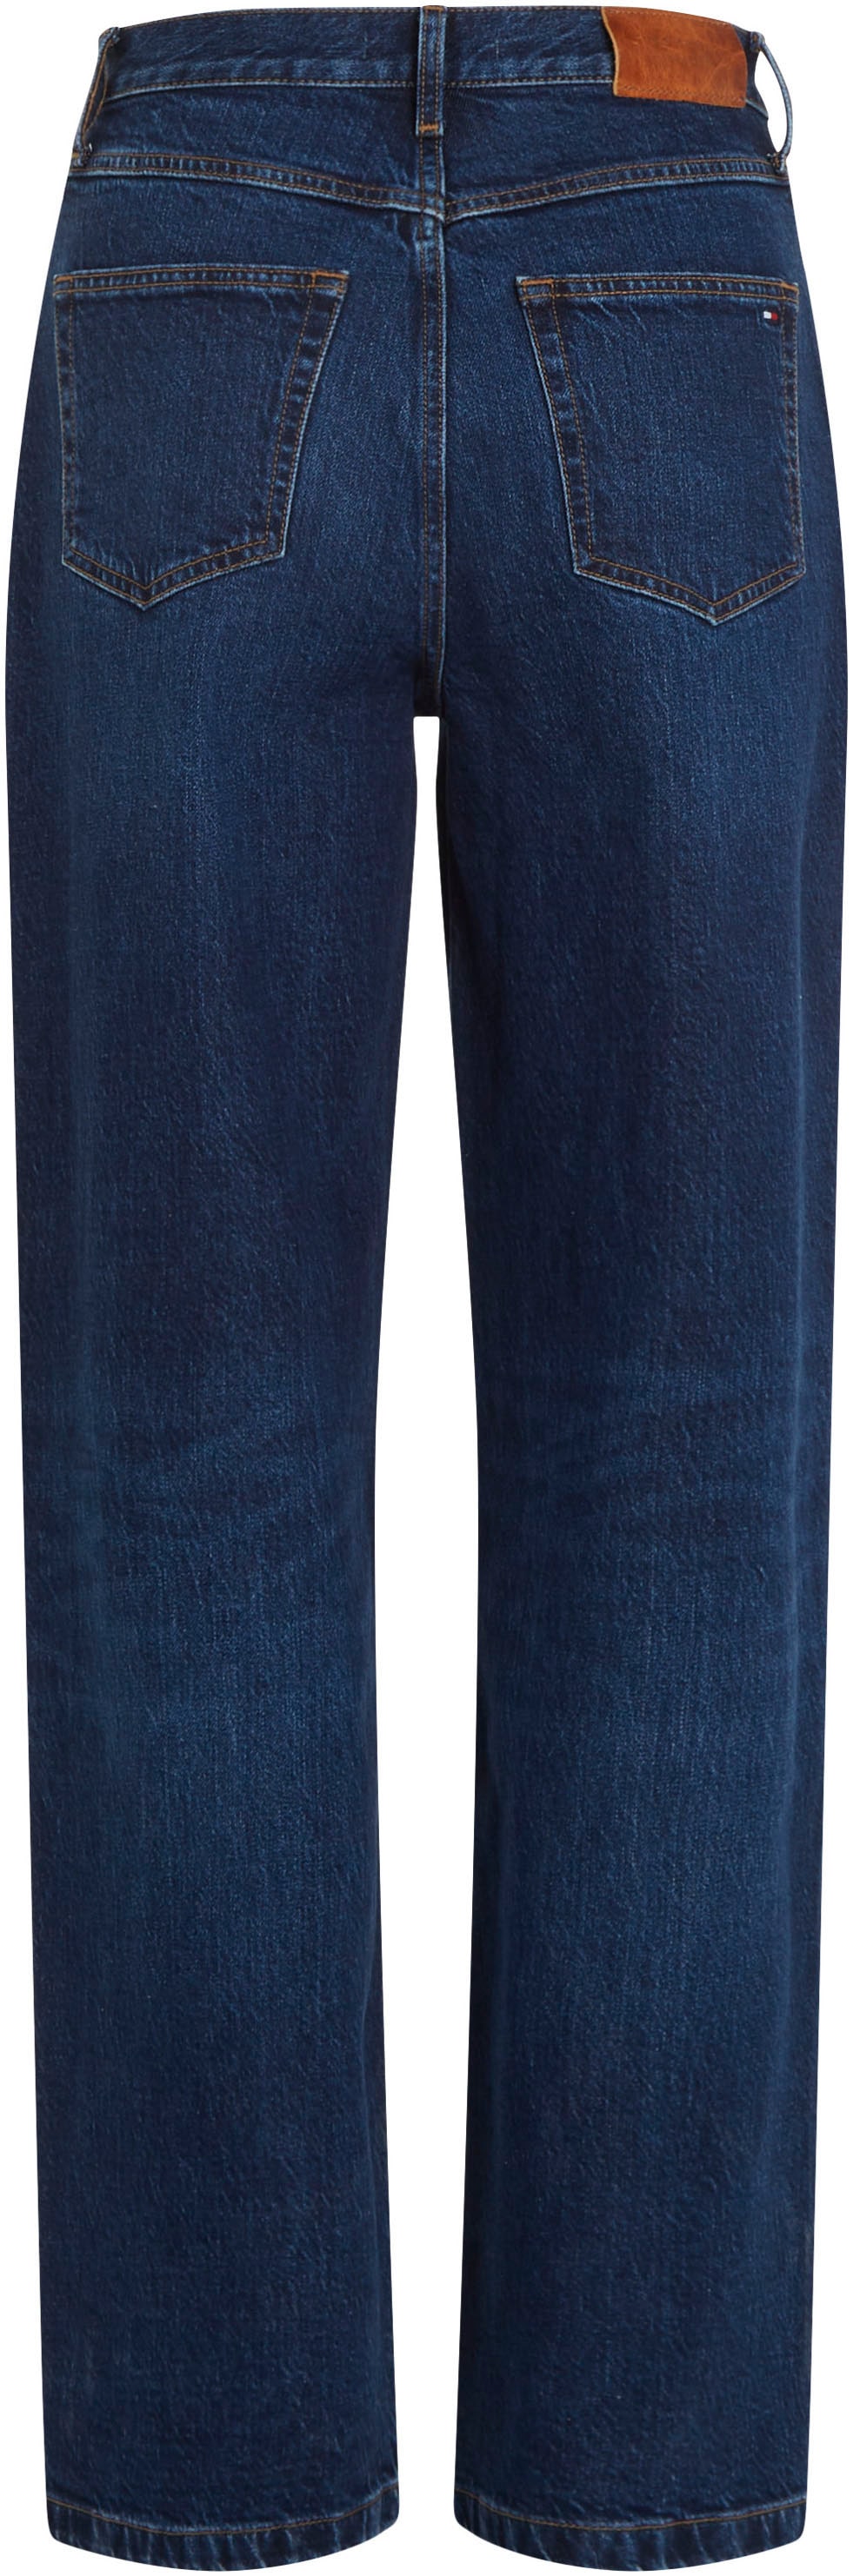 Relax-fit-Jeans Waschung weißer »RELAXED kaufen Hilfiger in PAM«, online STRAIGHT Tommy HW